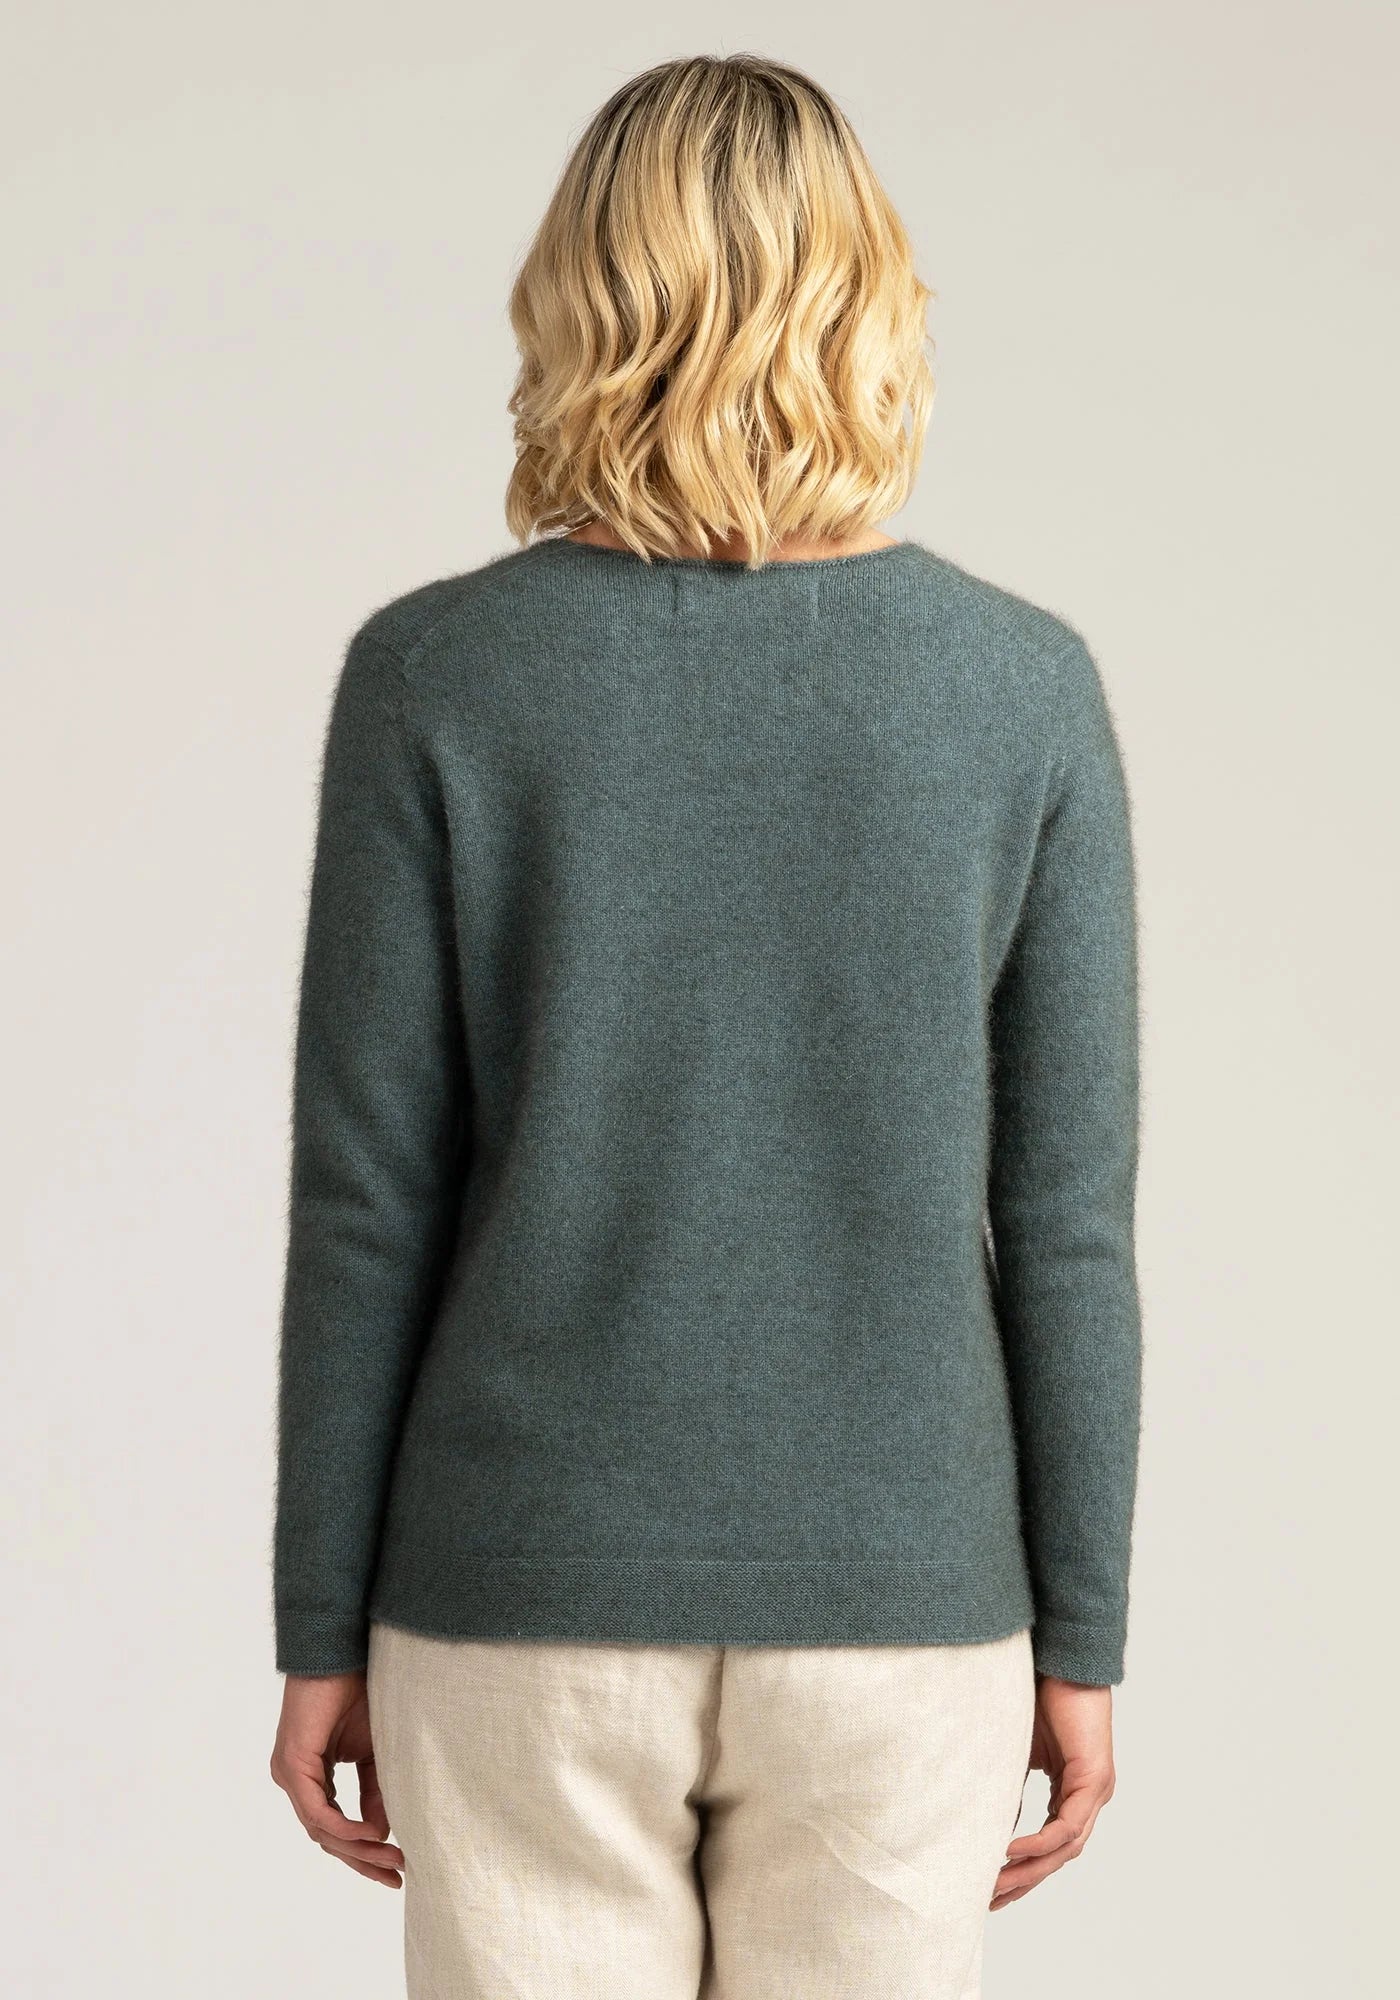 "Stay cozy in our luxurious merino wool grey sweater. Effortless style meets ultimate comfort. Shop now!"